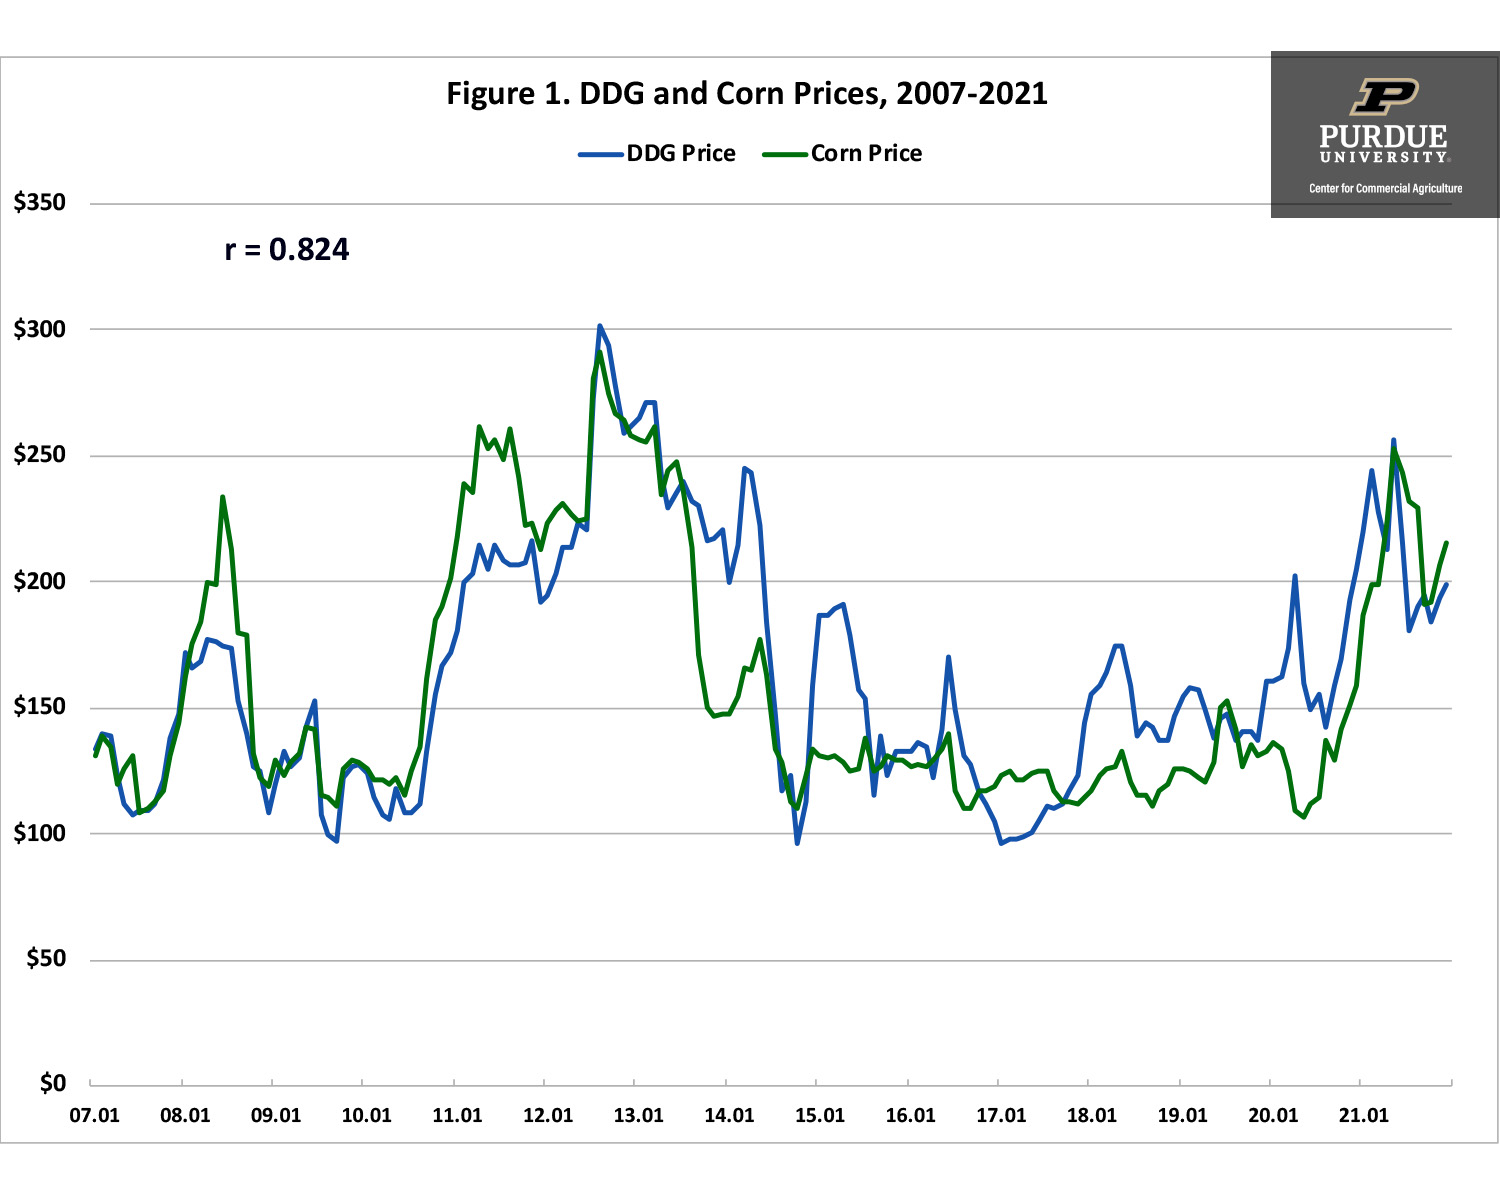 Figure 1. DDG and Corn Prices, 2007-2021